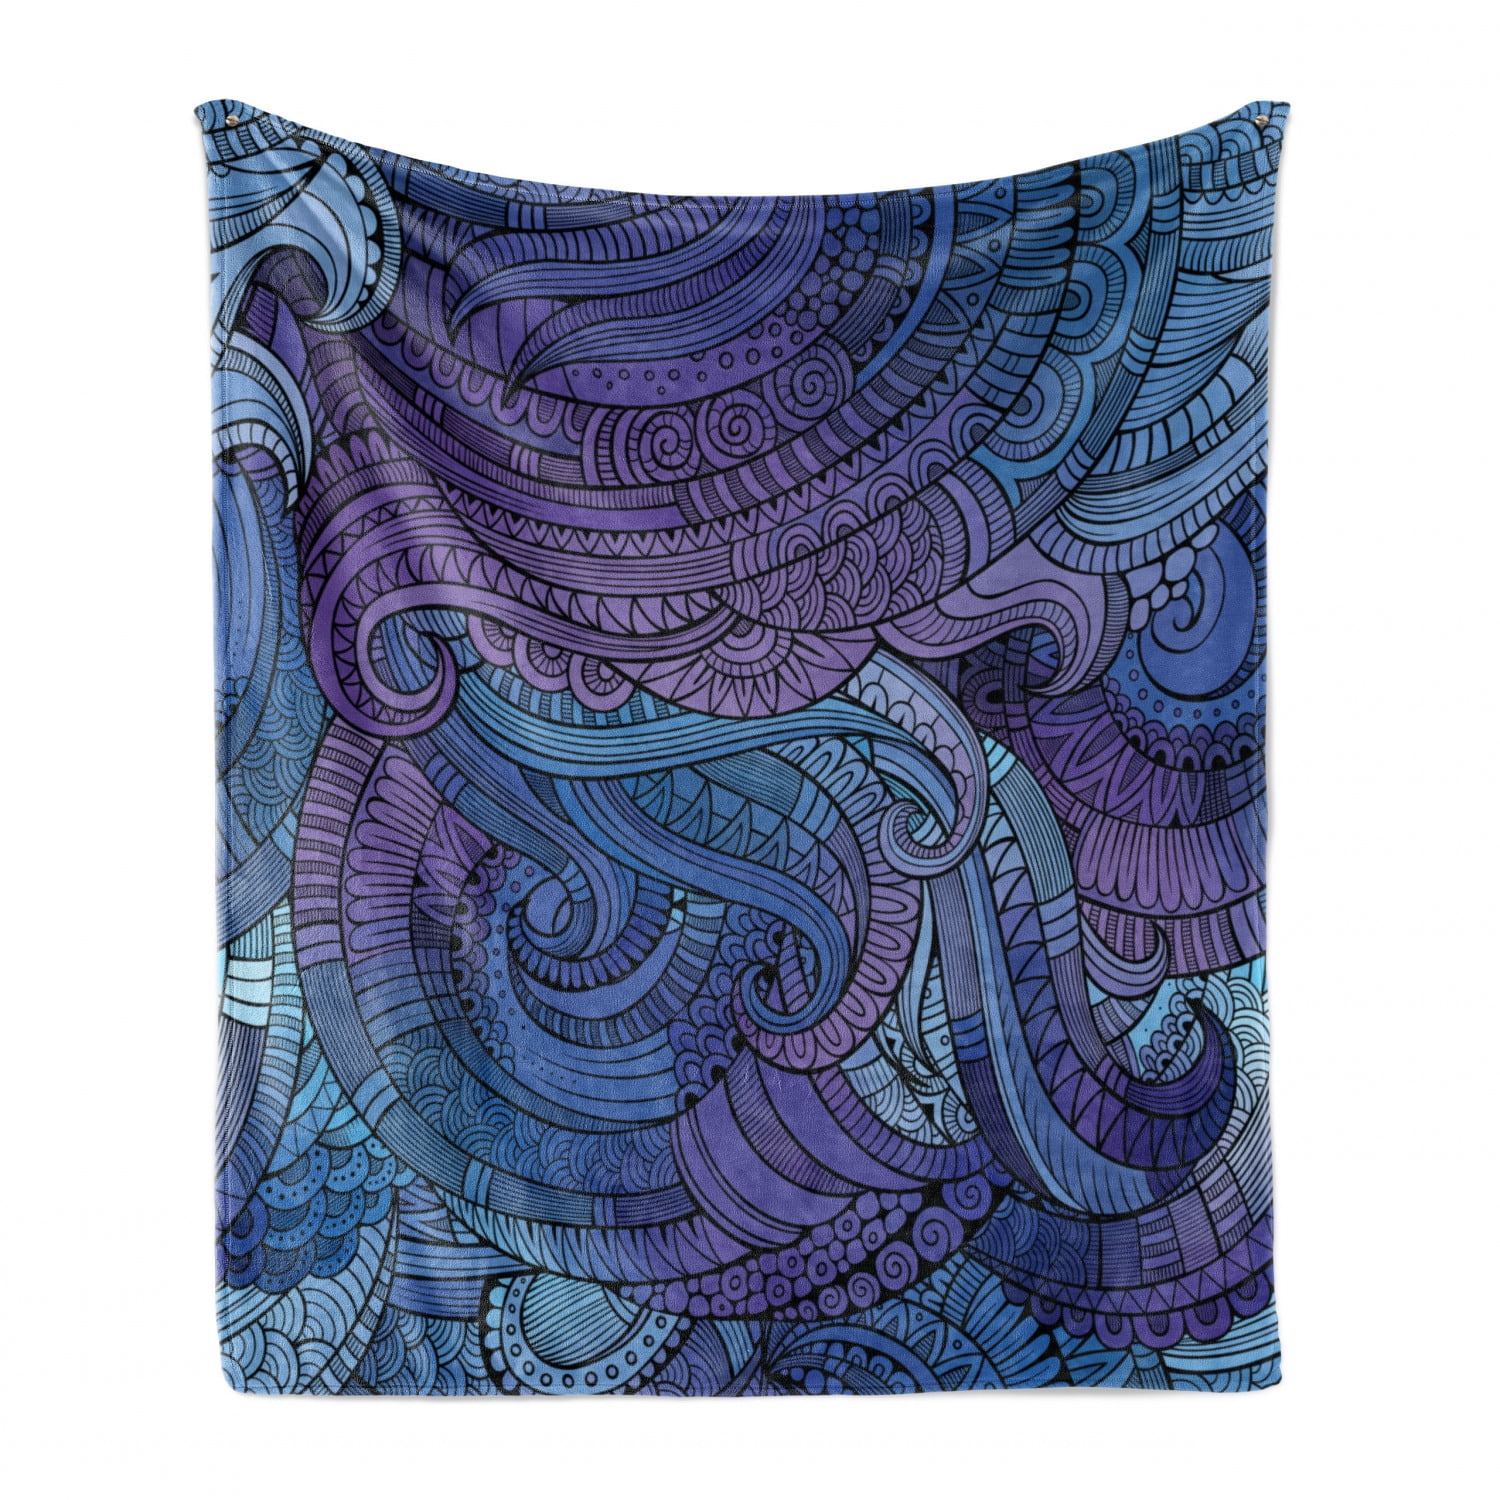 Abstract Soft Flannel Fleece Throw Blanket, Ocean Inspired Graphic Paisley  Swirled Hand Drawn Artwork Print, Cozy Plush for Indoor and Outdoor Use,  50